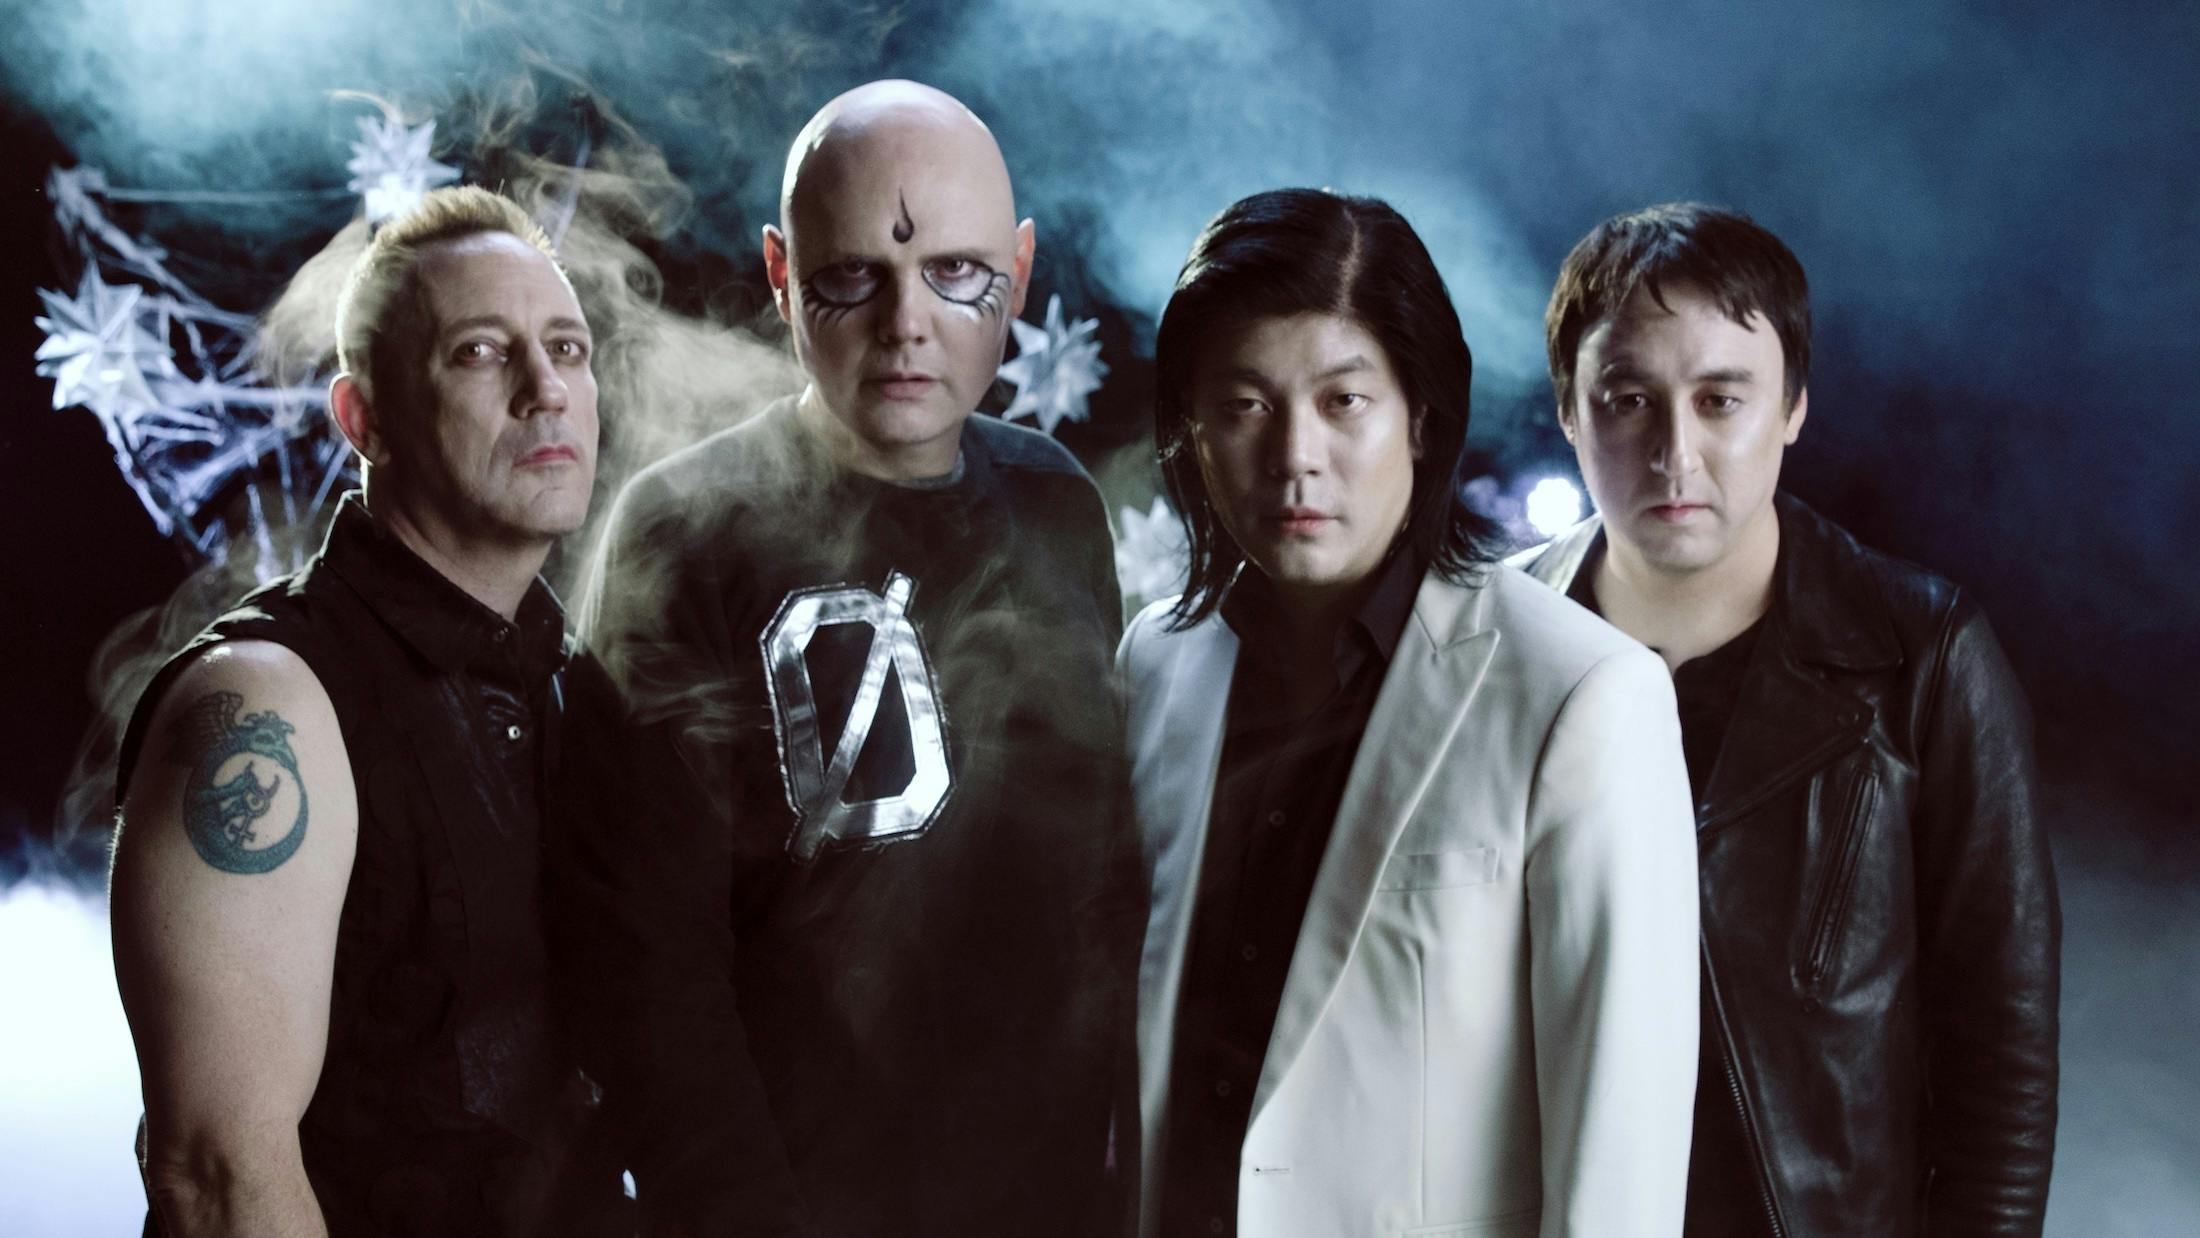 Billy Corgan On New Smashing Pumpkins: "We've Gone Back To Just Being Ourselves"